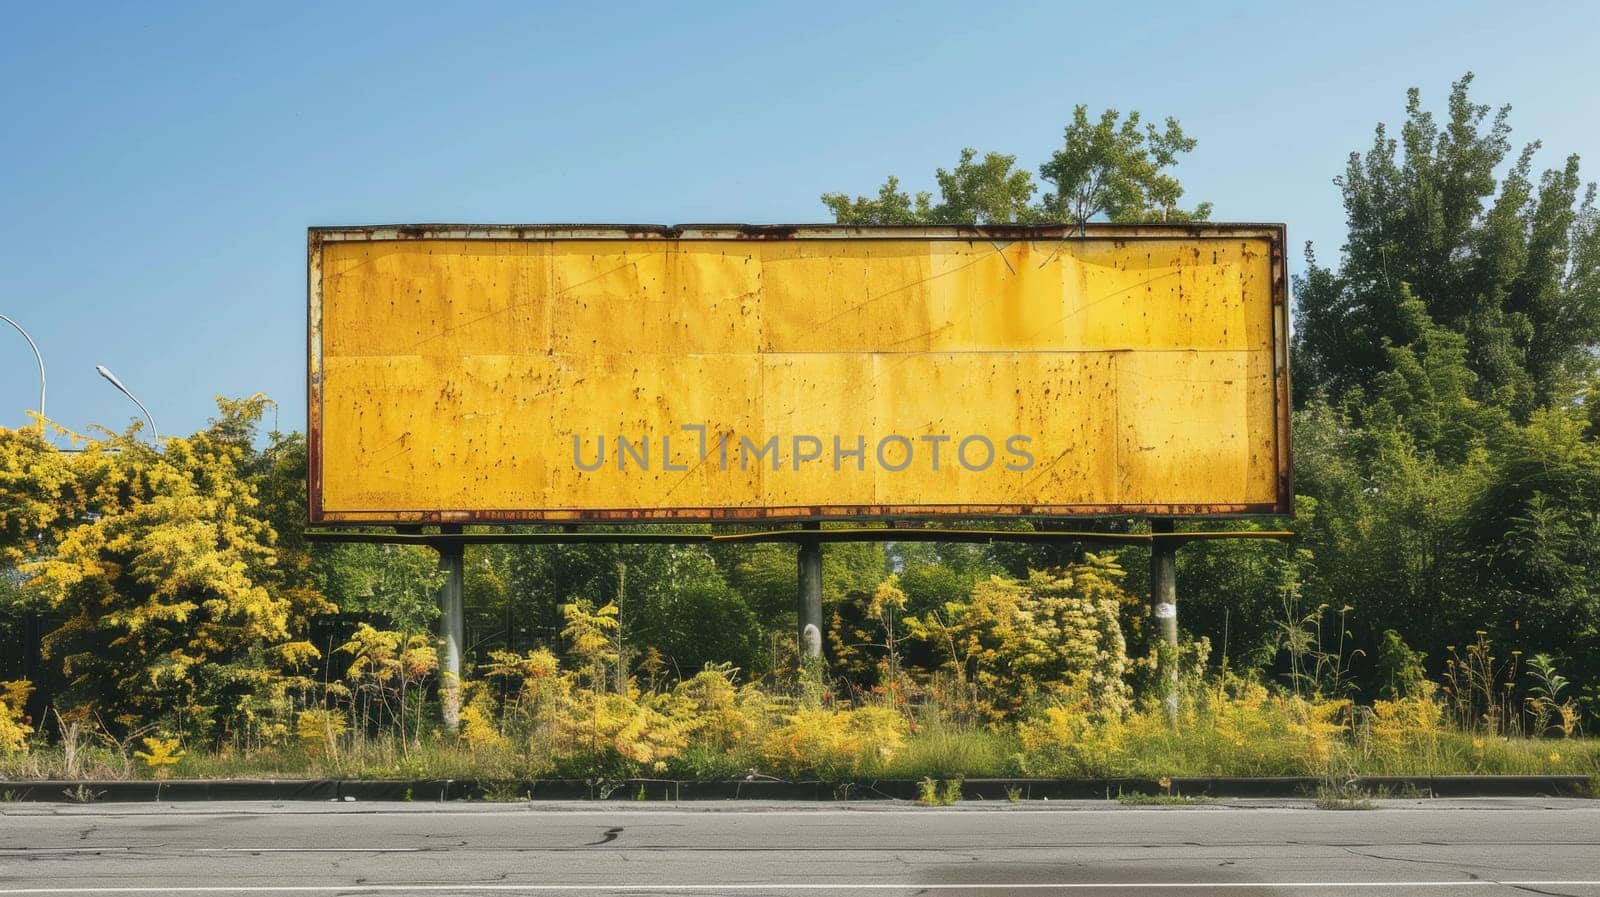 A large yellow billboard sitting on the side of a road